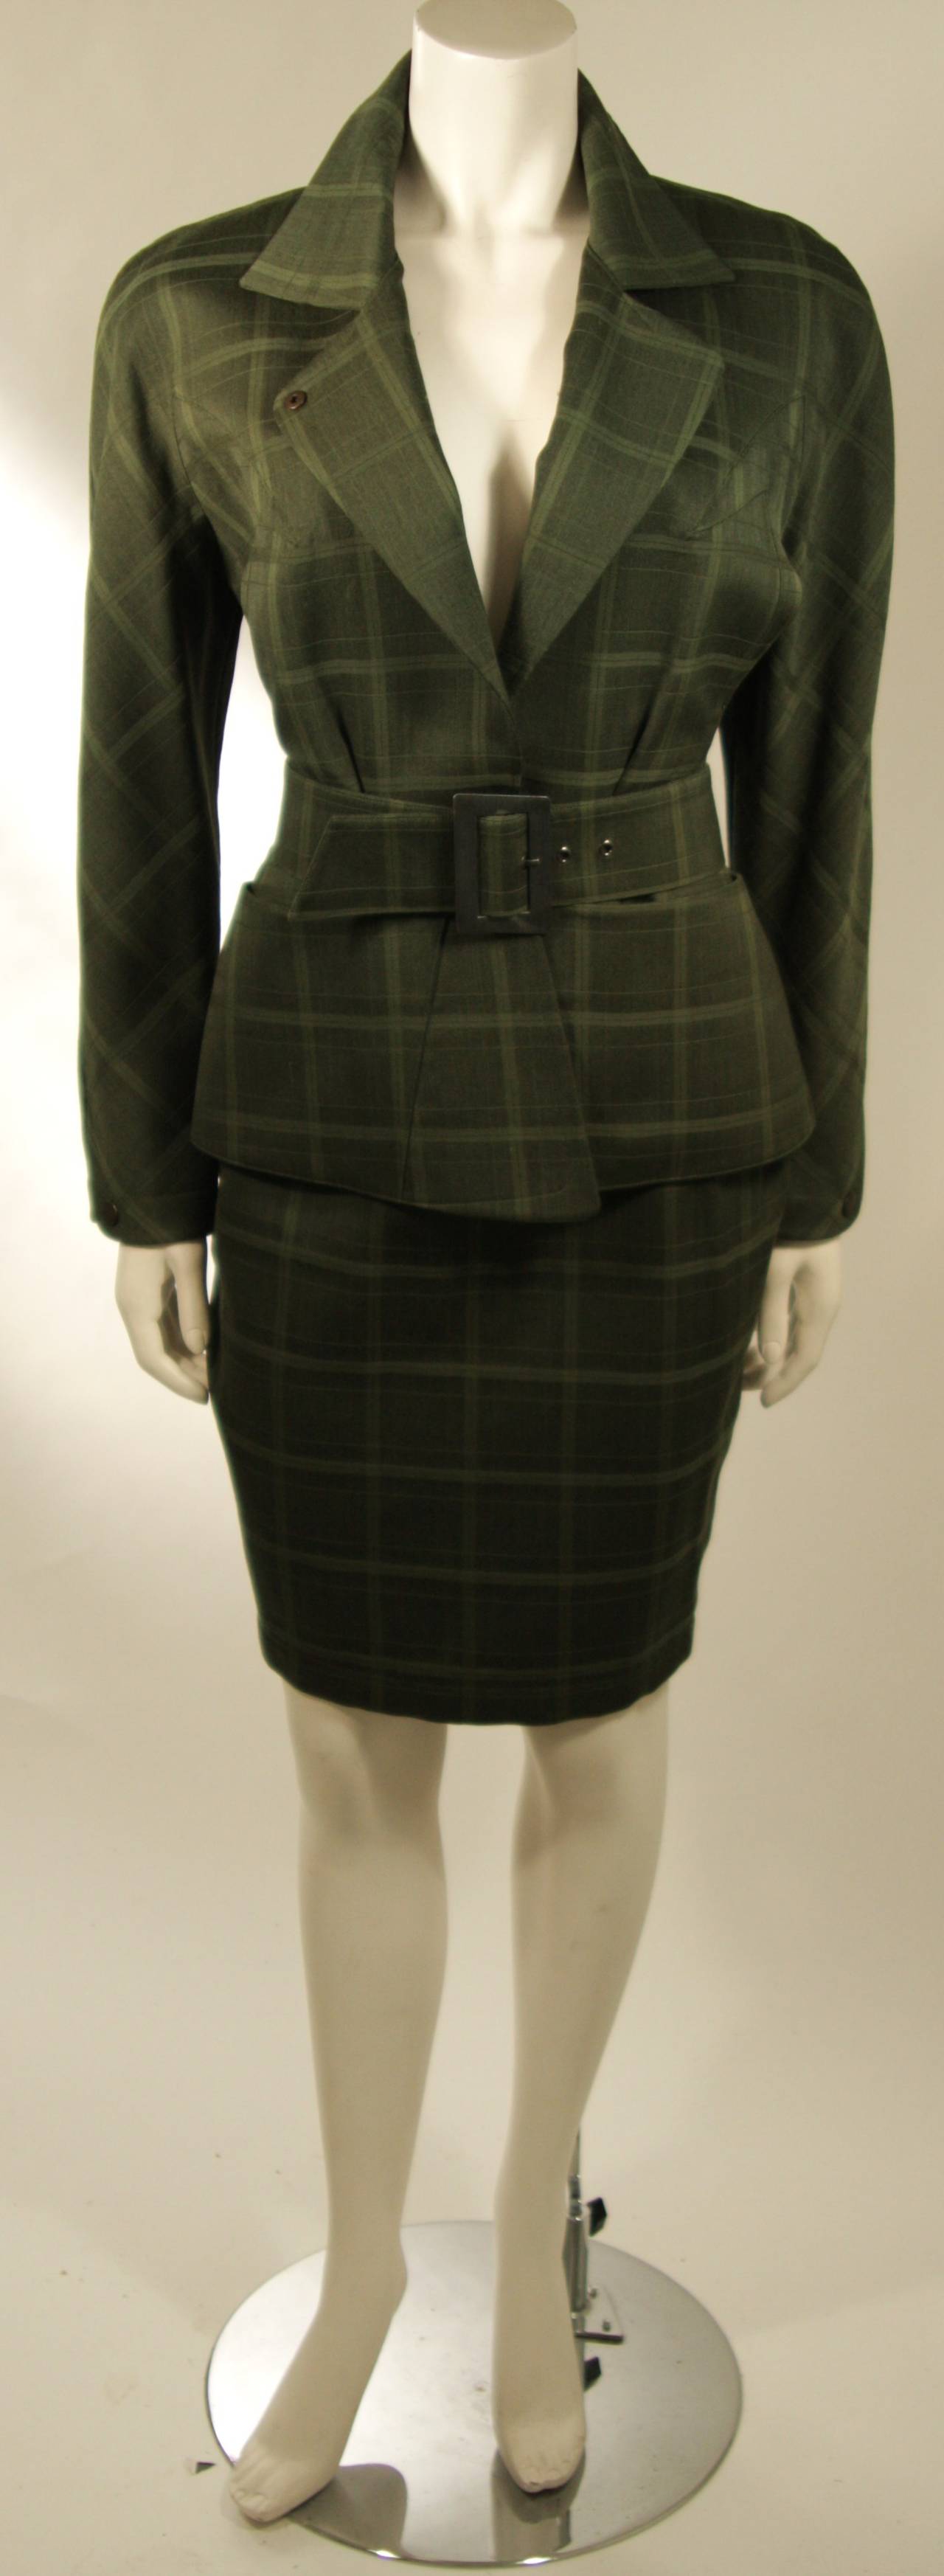 This Thierry Mugler ensemble is composed of green plaid. The suit features a classic Mugler silhouette which embodies strength, power, seduction, and sophistication. The jacket is cut to skim the female form with perfection, there are front pockets